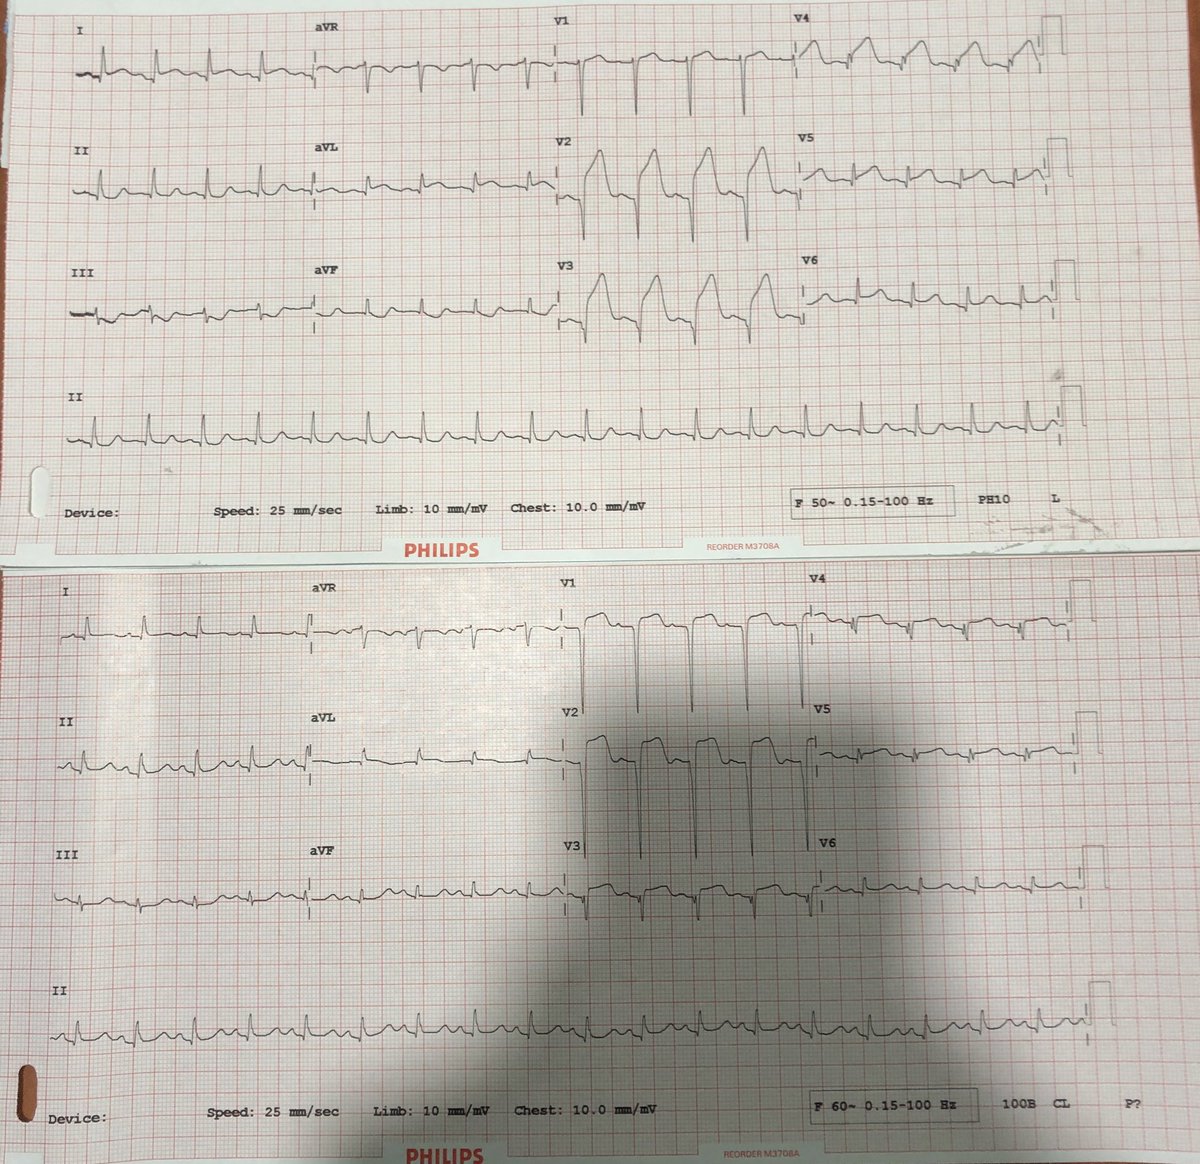 Pre and Post PCI ECG - Note the >70% ST resolution indicating optimal myocardial perfusion.